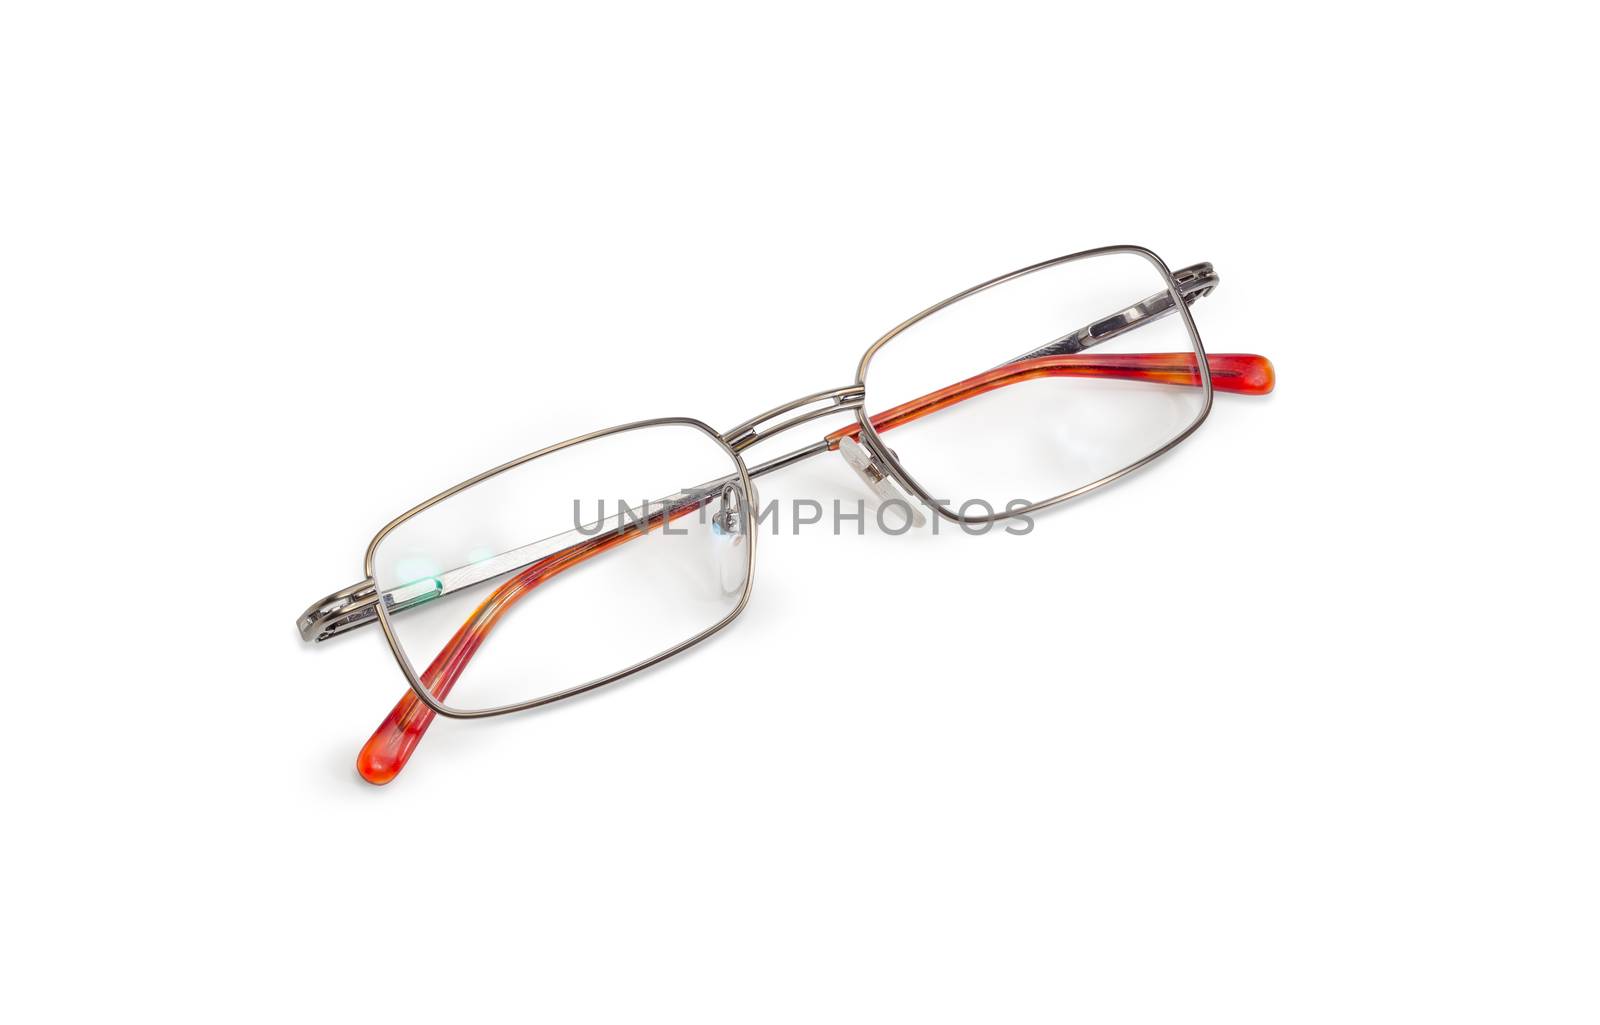 Modern pair of the classic mens eyeglasses in metal frame with folded glasses temples on a white background
